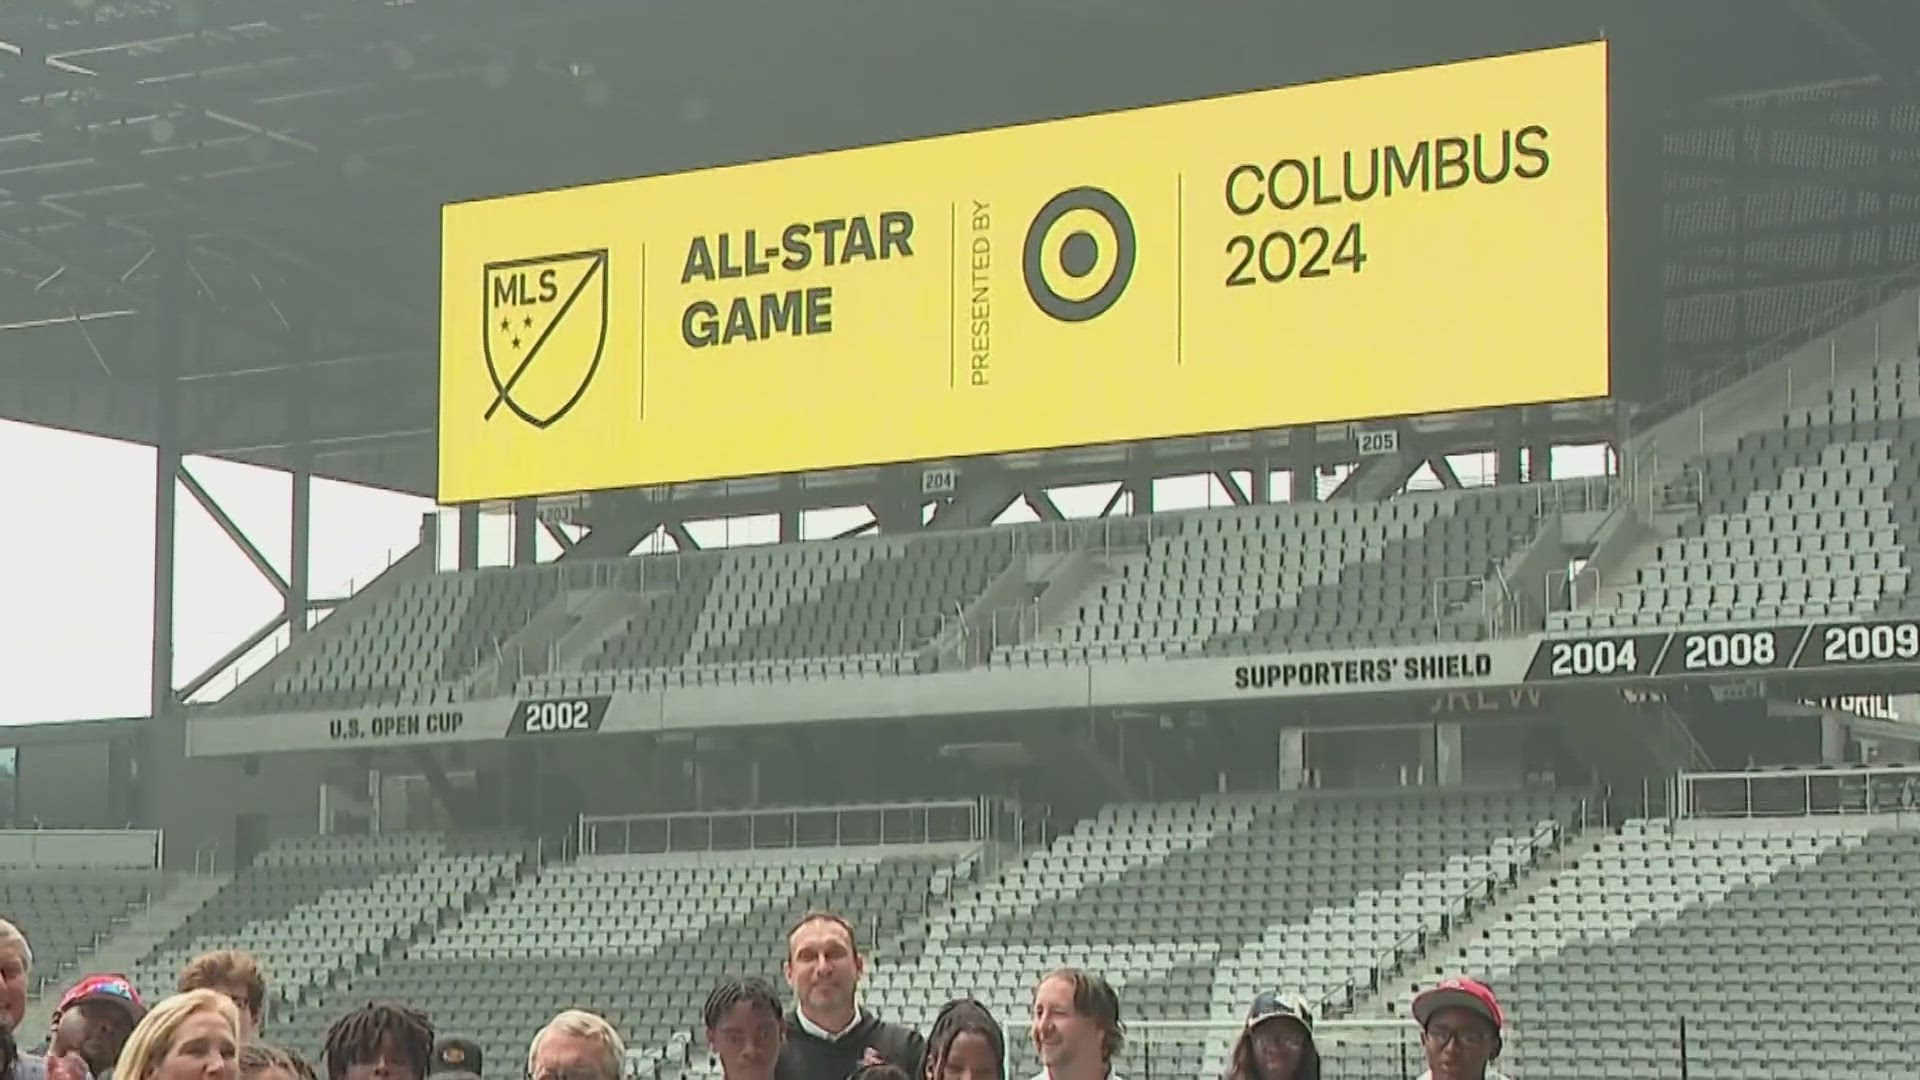 Just five years after the #SavetheCrew campaign, the MLS will bring this worldwide event to Columbus.